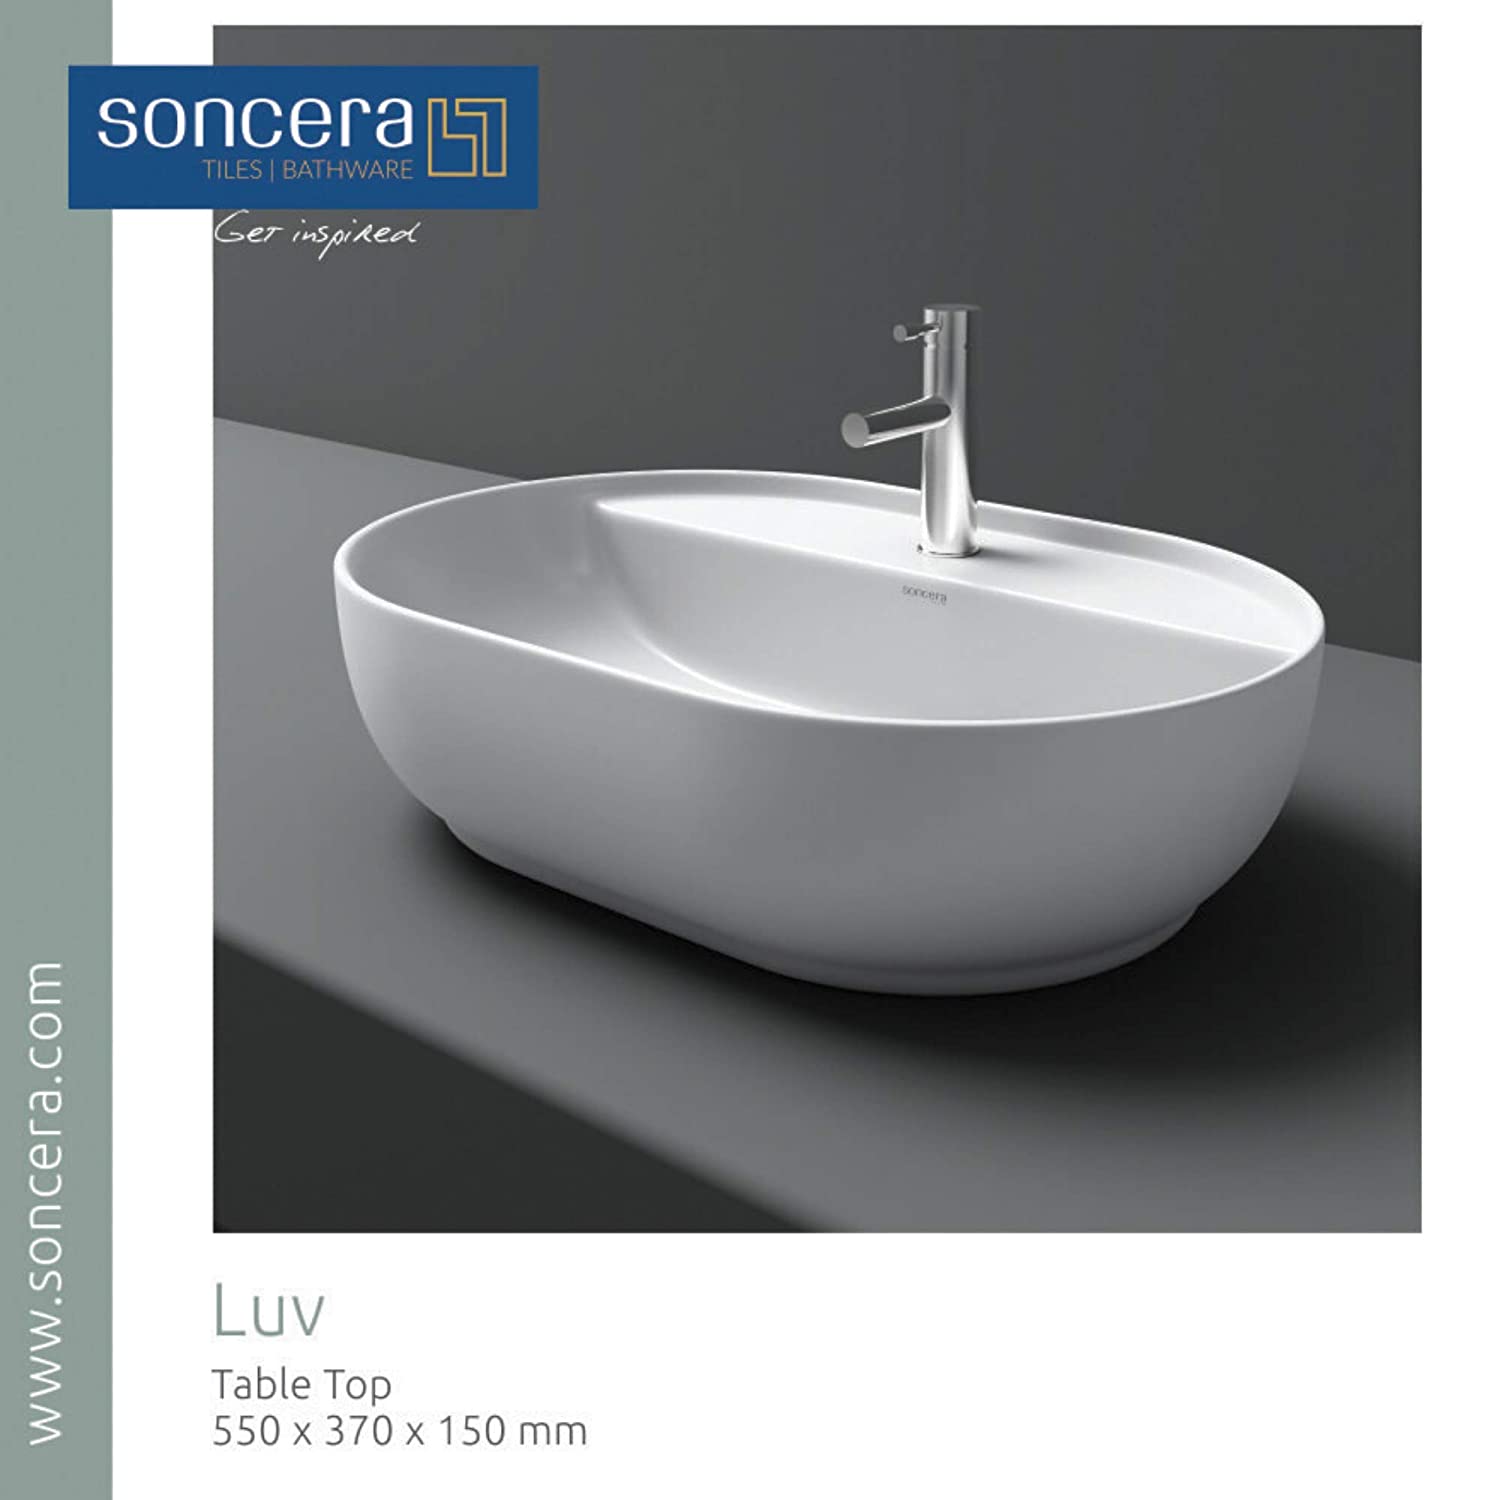 Soncera Luv Table Top